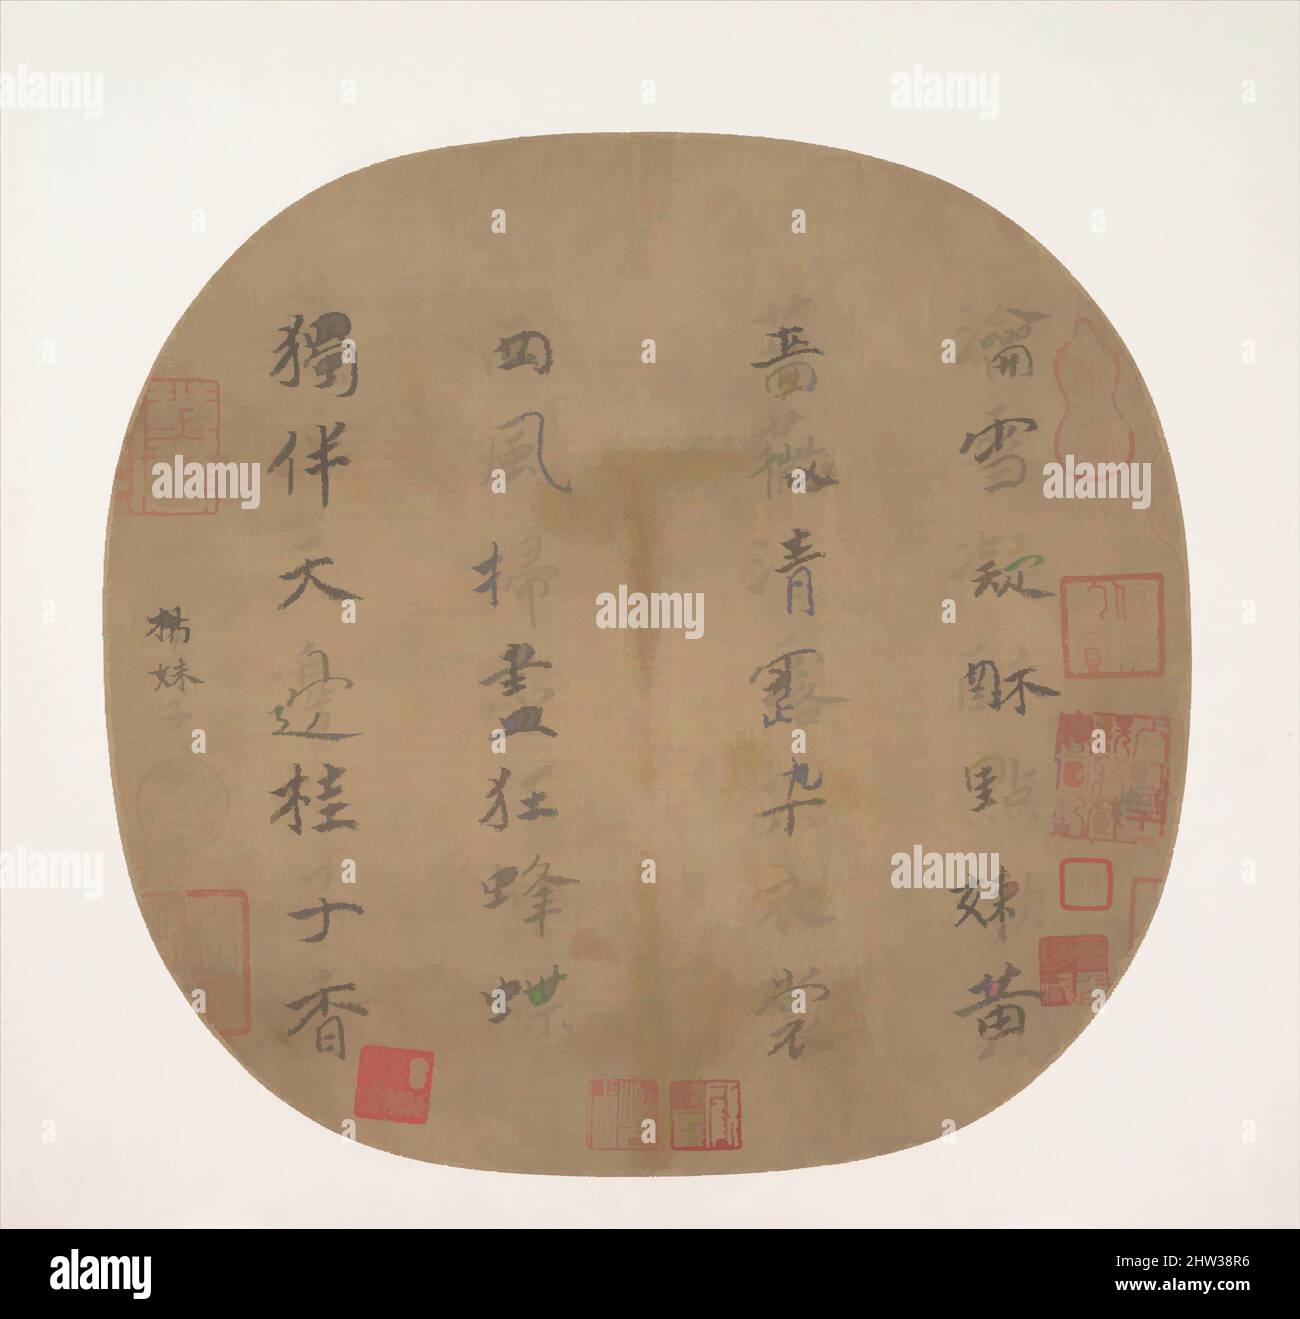 Art inspired by 南宋 楊皇后 楷書瀹雪凝酥七絕 團扇, Quatrain on yellow roses, Southern Song dynasty (1127–1279), early 13th century, China, Round fan mounted as an album leaf; ink on silk, 9 1/4 x 9 5/8 in. (23.5 x 24.5 cm); with mat: 14 1/2 x 15 1/2 in. (36.8 x 39.4 cm), Calligraphy, Empress Yang, Classic works modernized by Artotop with a splash of modernity. Shapes, color and value, eye-catching visual impact on art. Emotions through freedom of artworks in a contemporary way. A timeless message pursuing a wildly creative new direction. Artists turning to the digital medium and creating the Artotop NFT Stock Photo